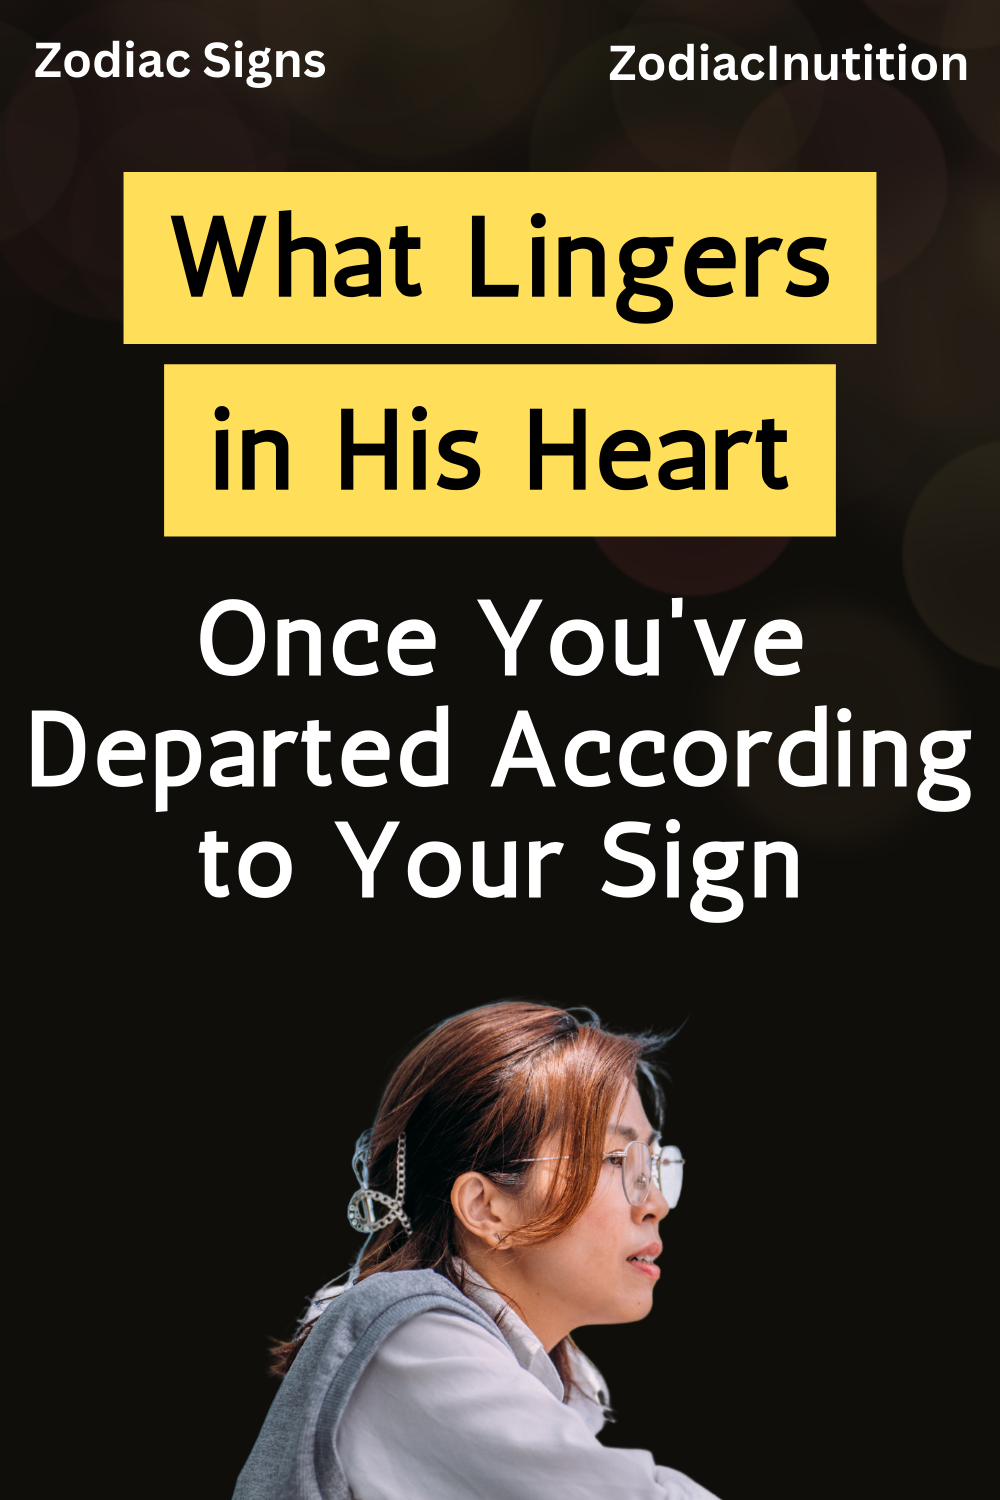 What Lingers in His Heart Once You've Departed According to Your Sign